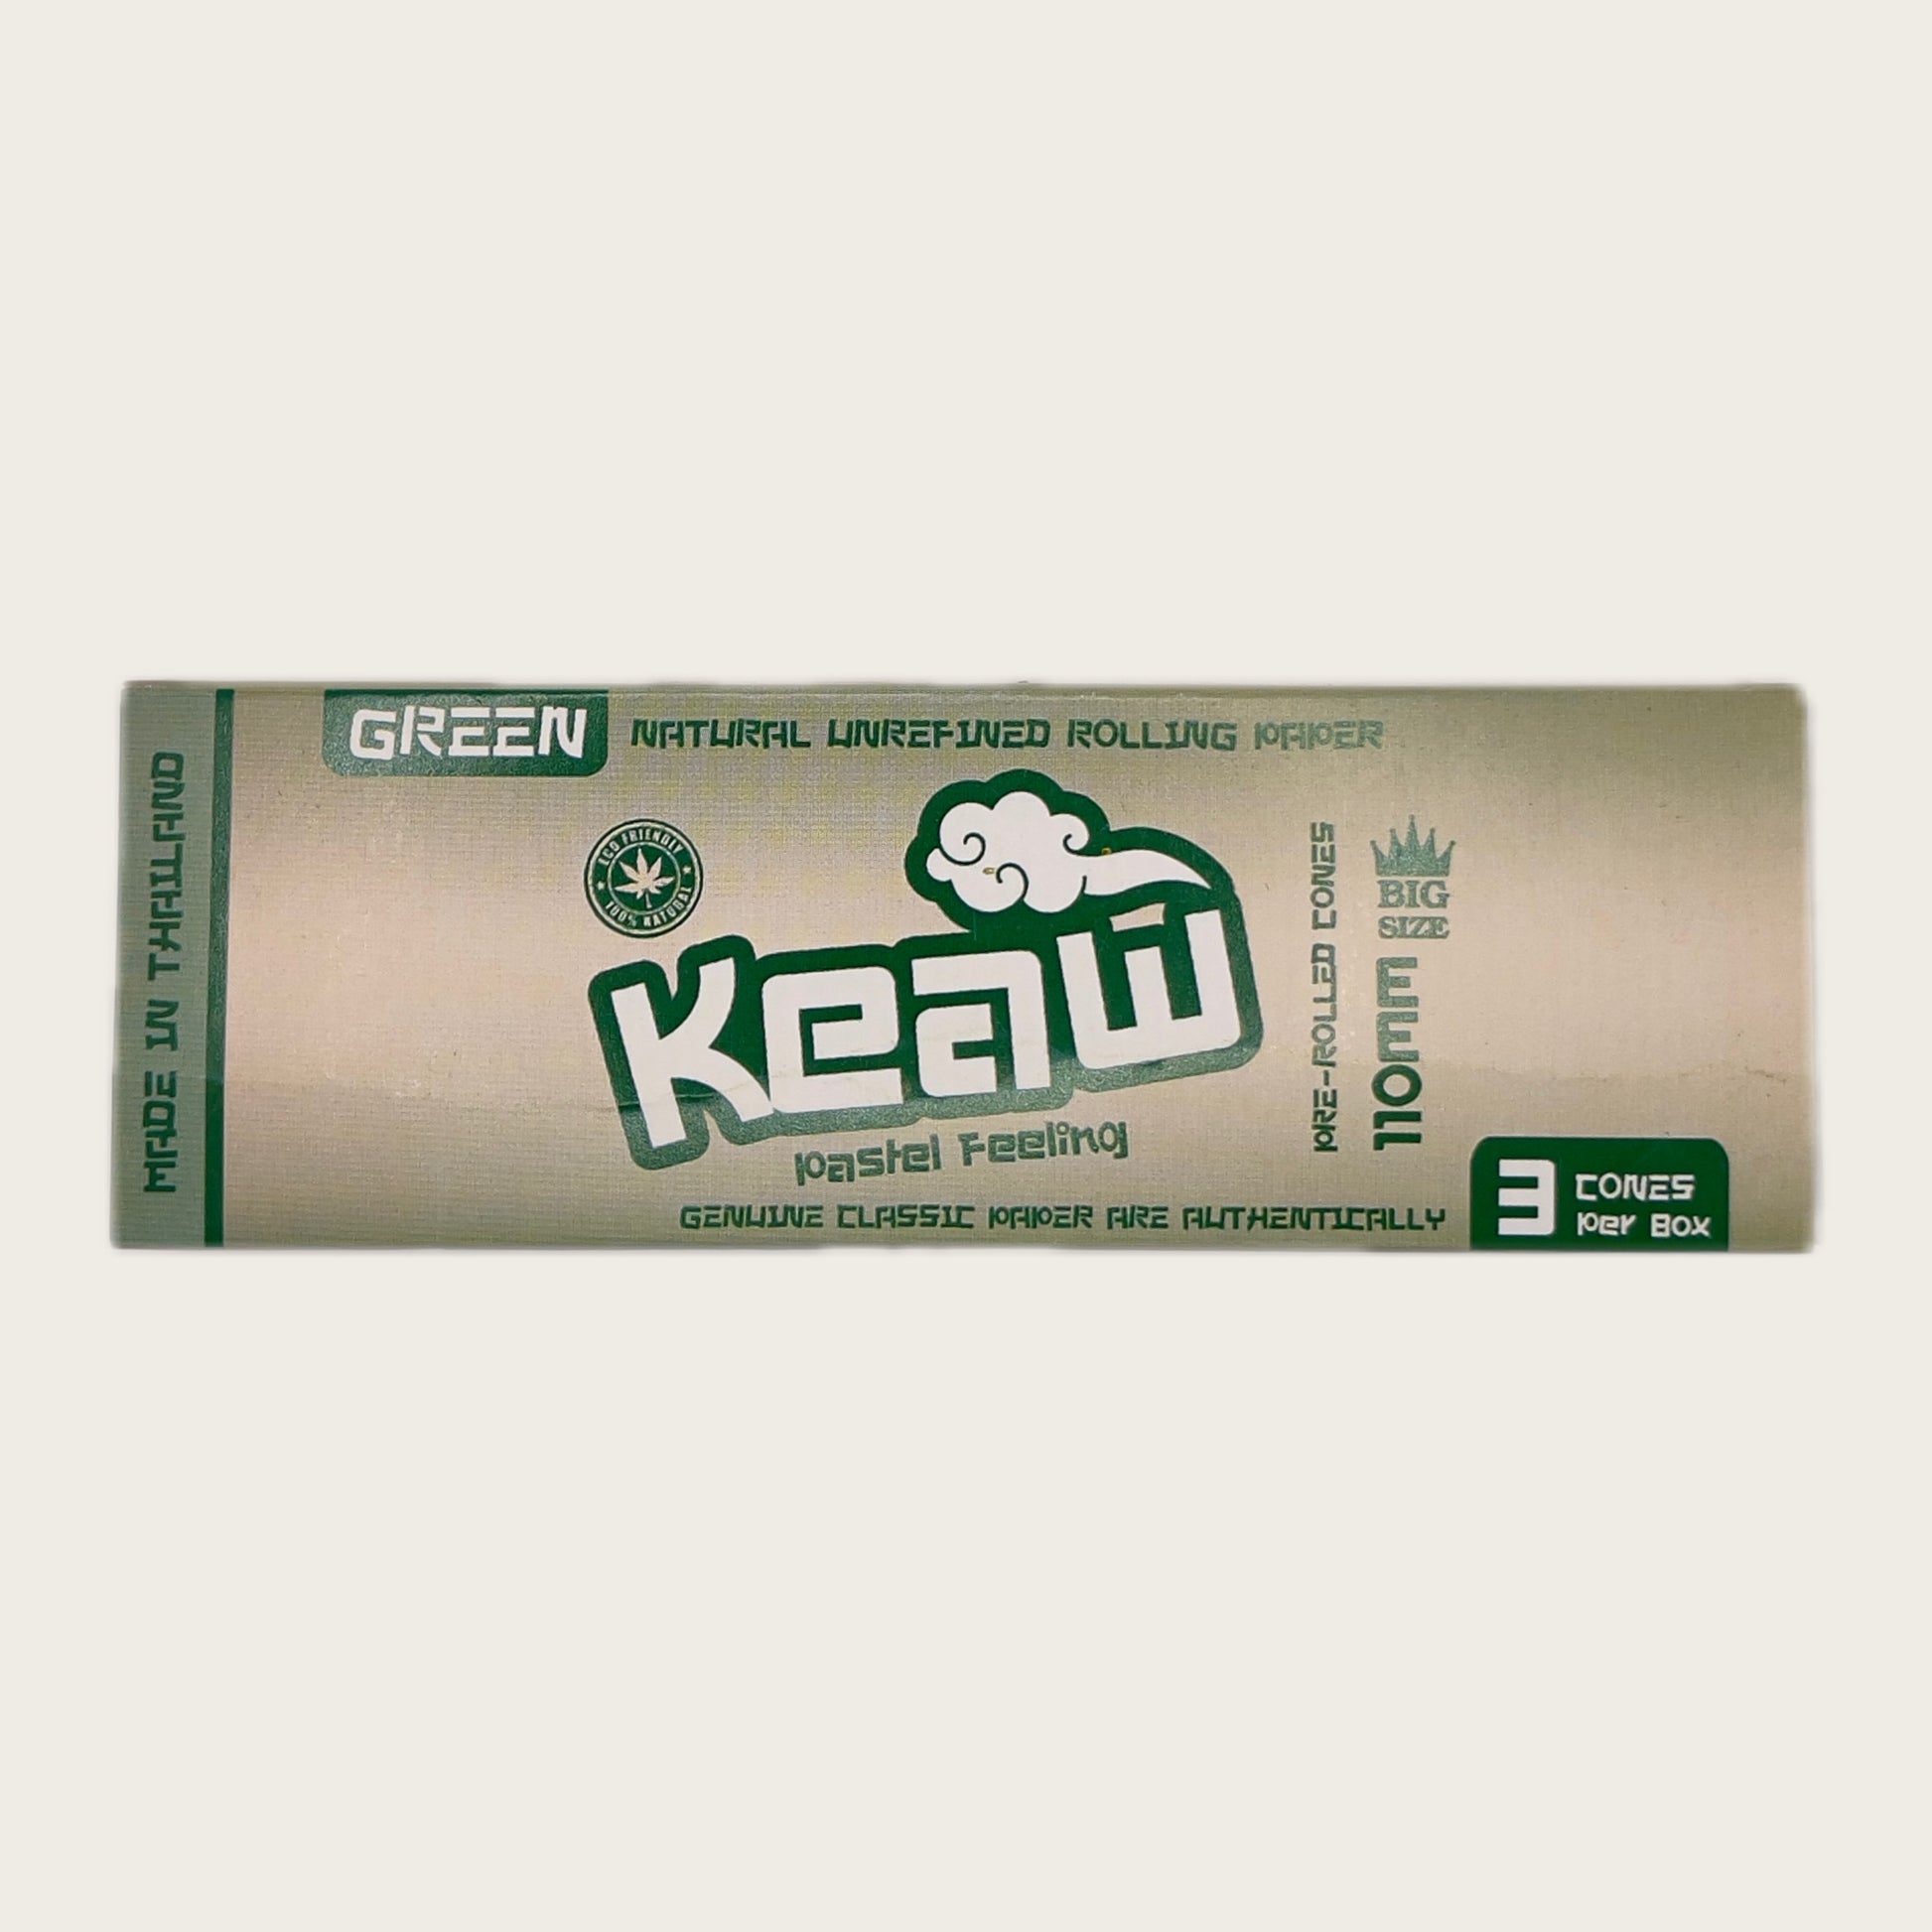 KEAW ROLLING PAPERS - CANNACON - THAILANDS PREMIUM CANNABIS DELIVERY